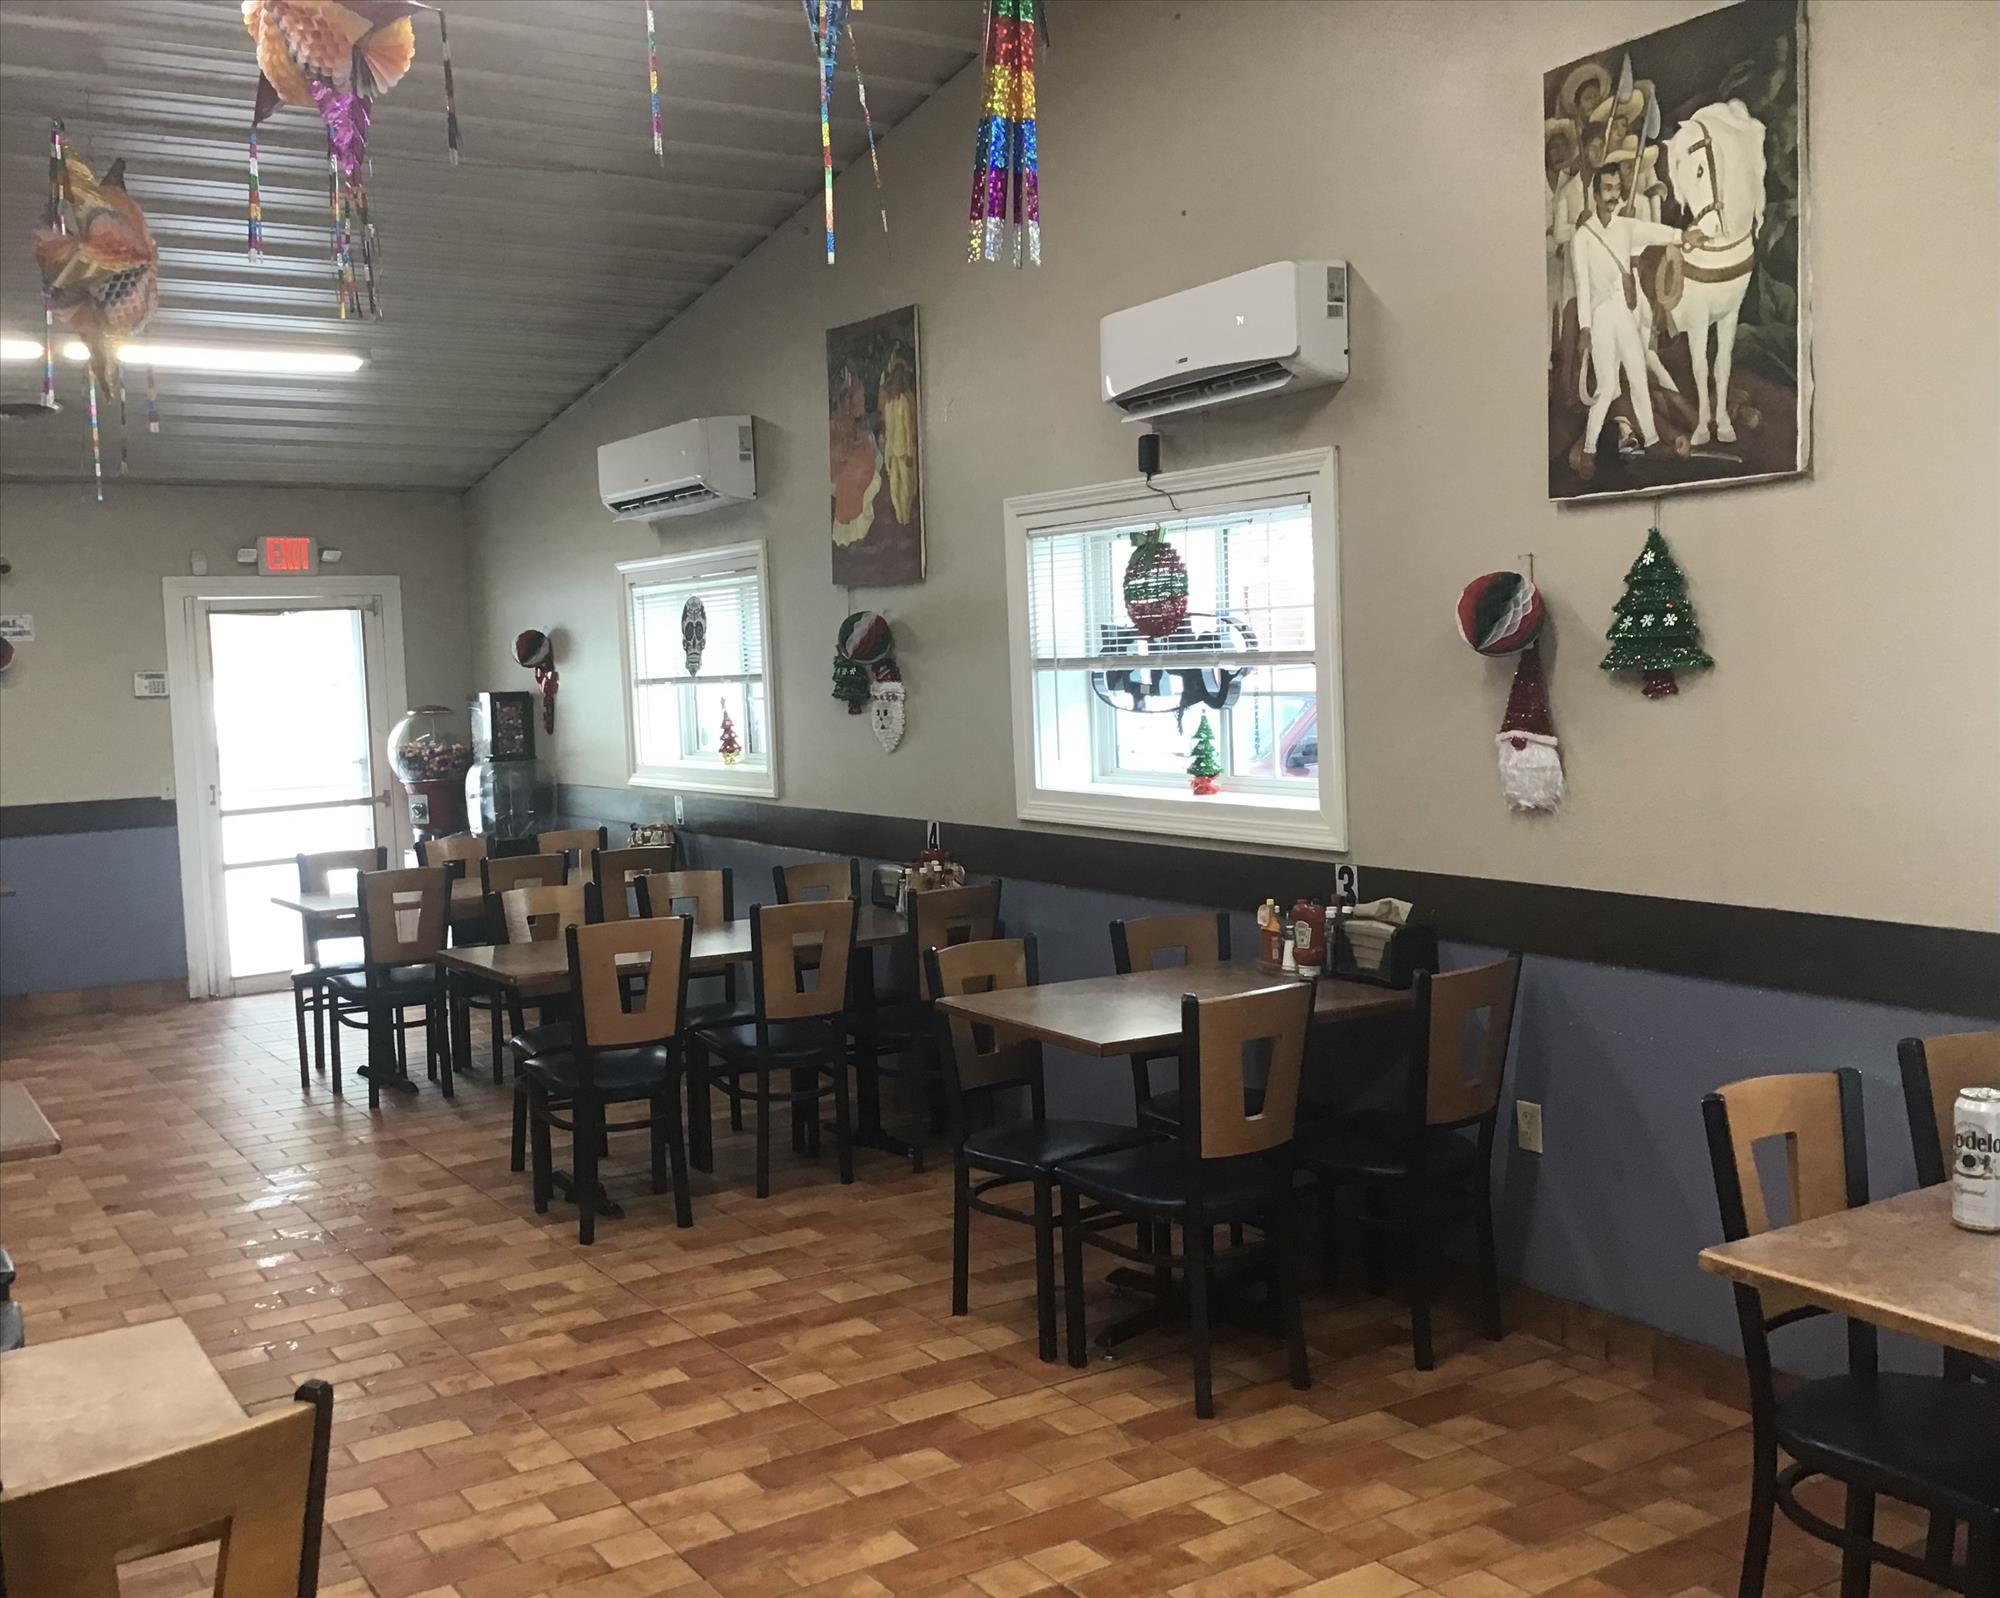 Kimberly Mexican Restaurant and Store